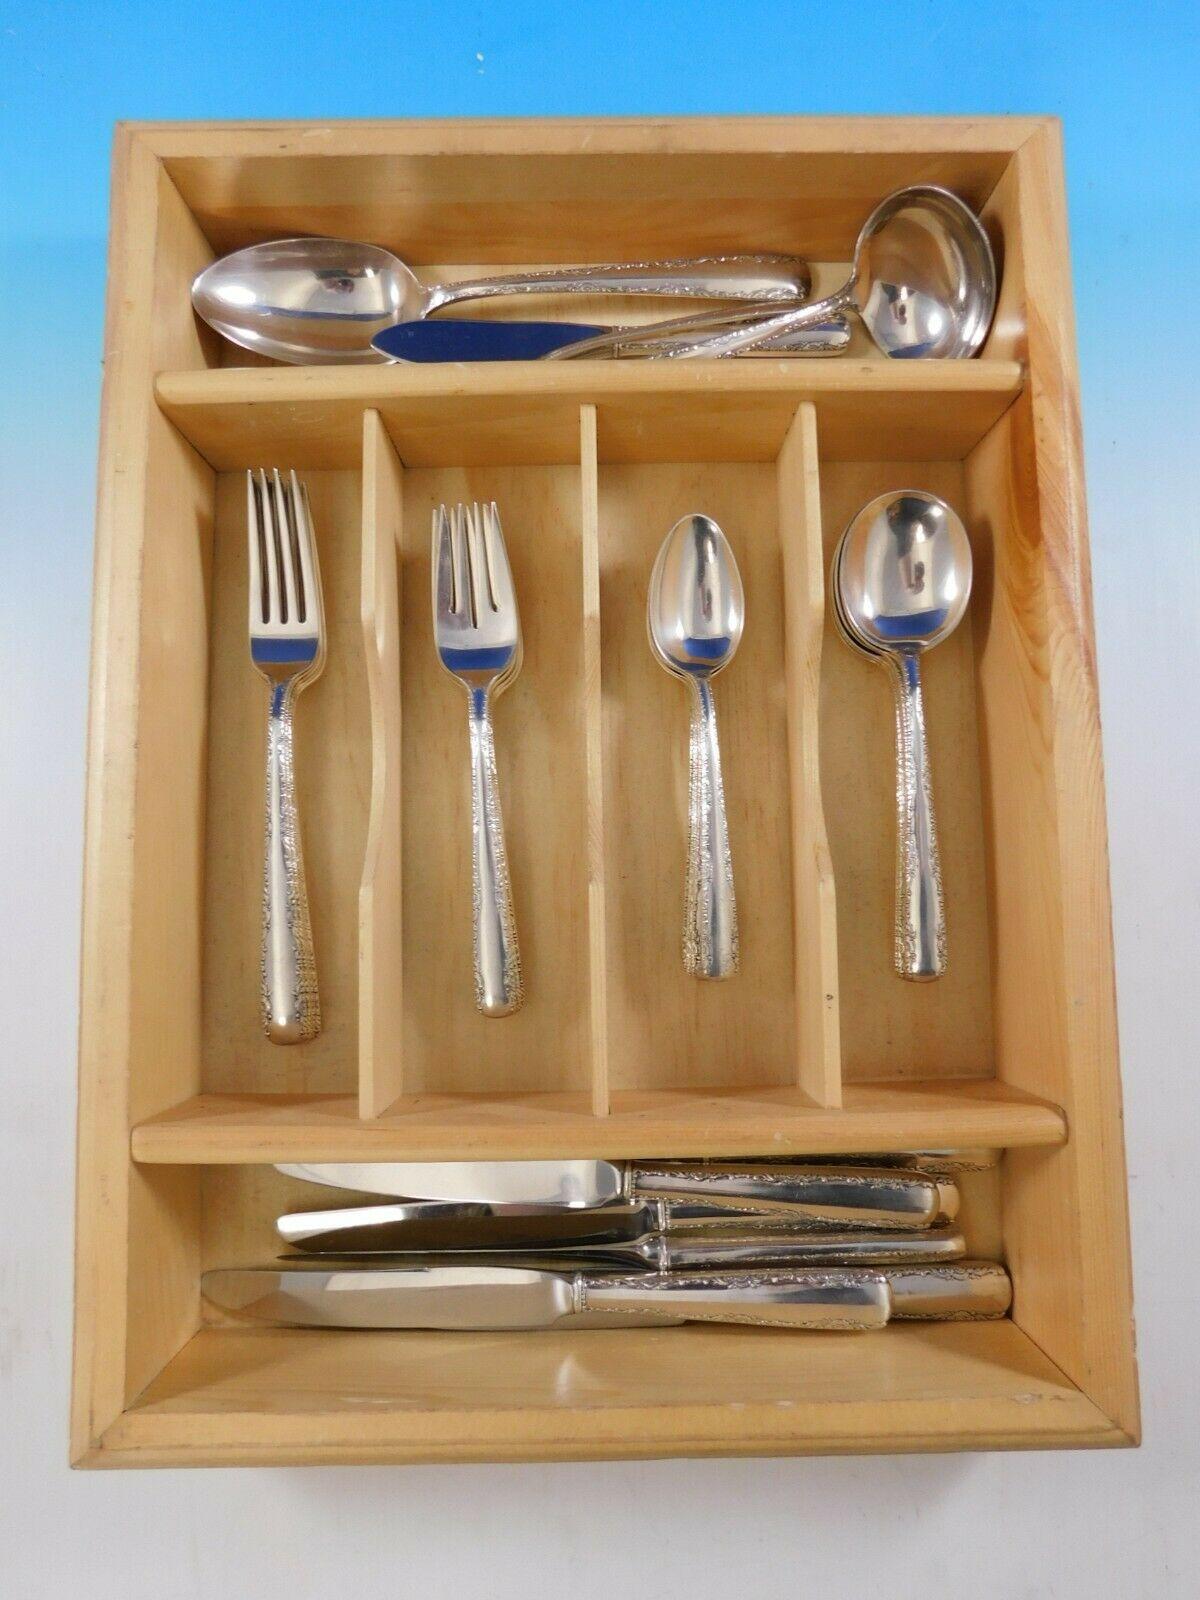 Camellia by Gorham sterling silver flatware set, 34 pieces. Great starter set! This set includes:

6 knives, 8 7/8